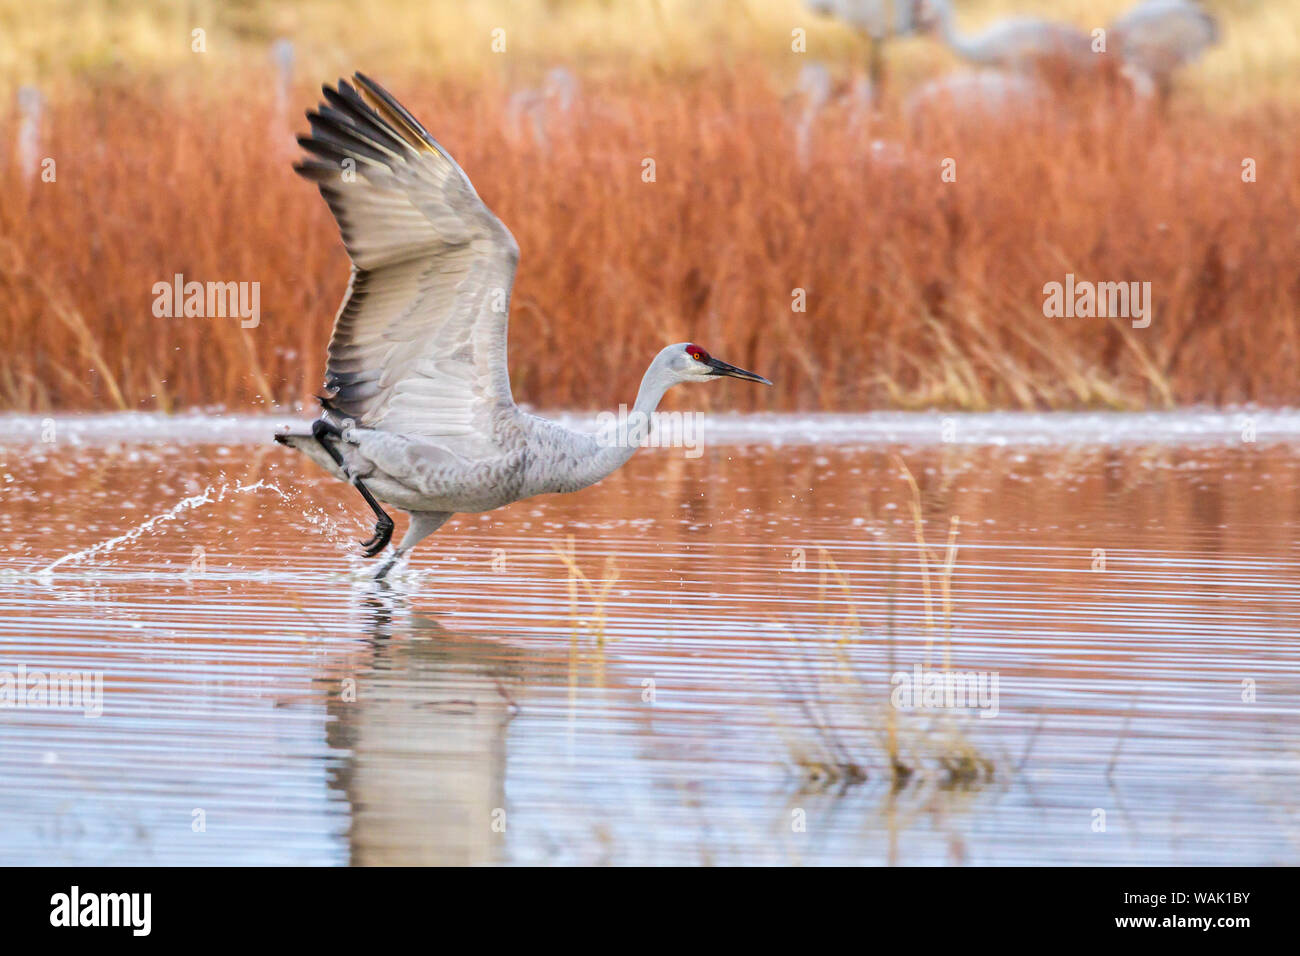 USA, New Mexico, Bosque del Apache National Wildlife Refuge. Sandhill crane flying from water. Credit as: Cathy & Gordon Illg / Jaynes Gallery / DanitaDelimont.com Stock Photo